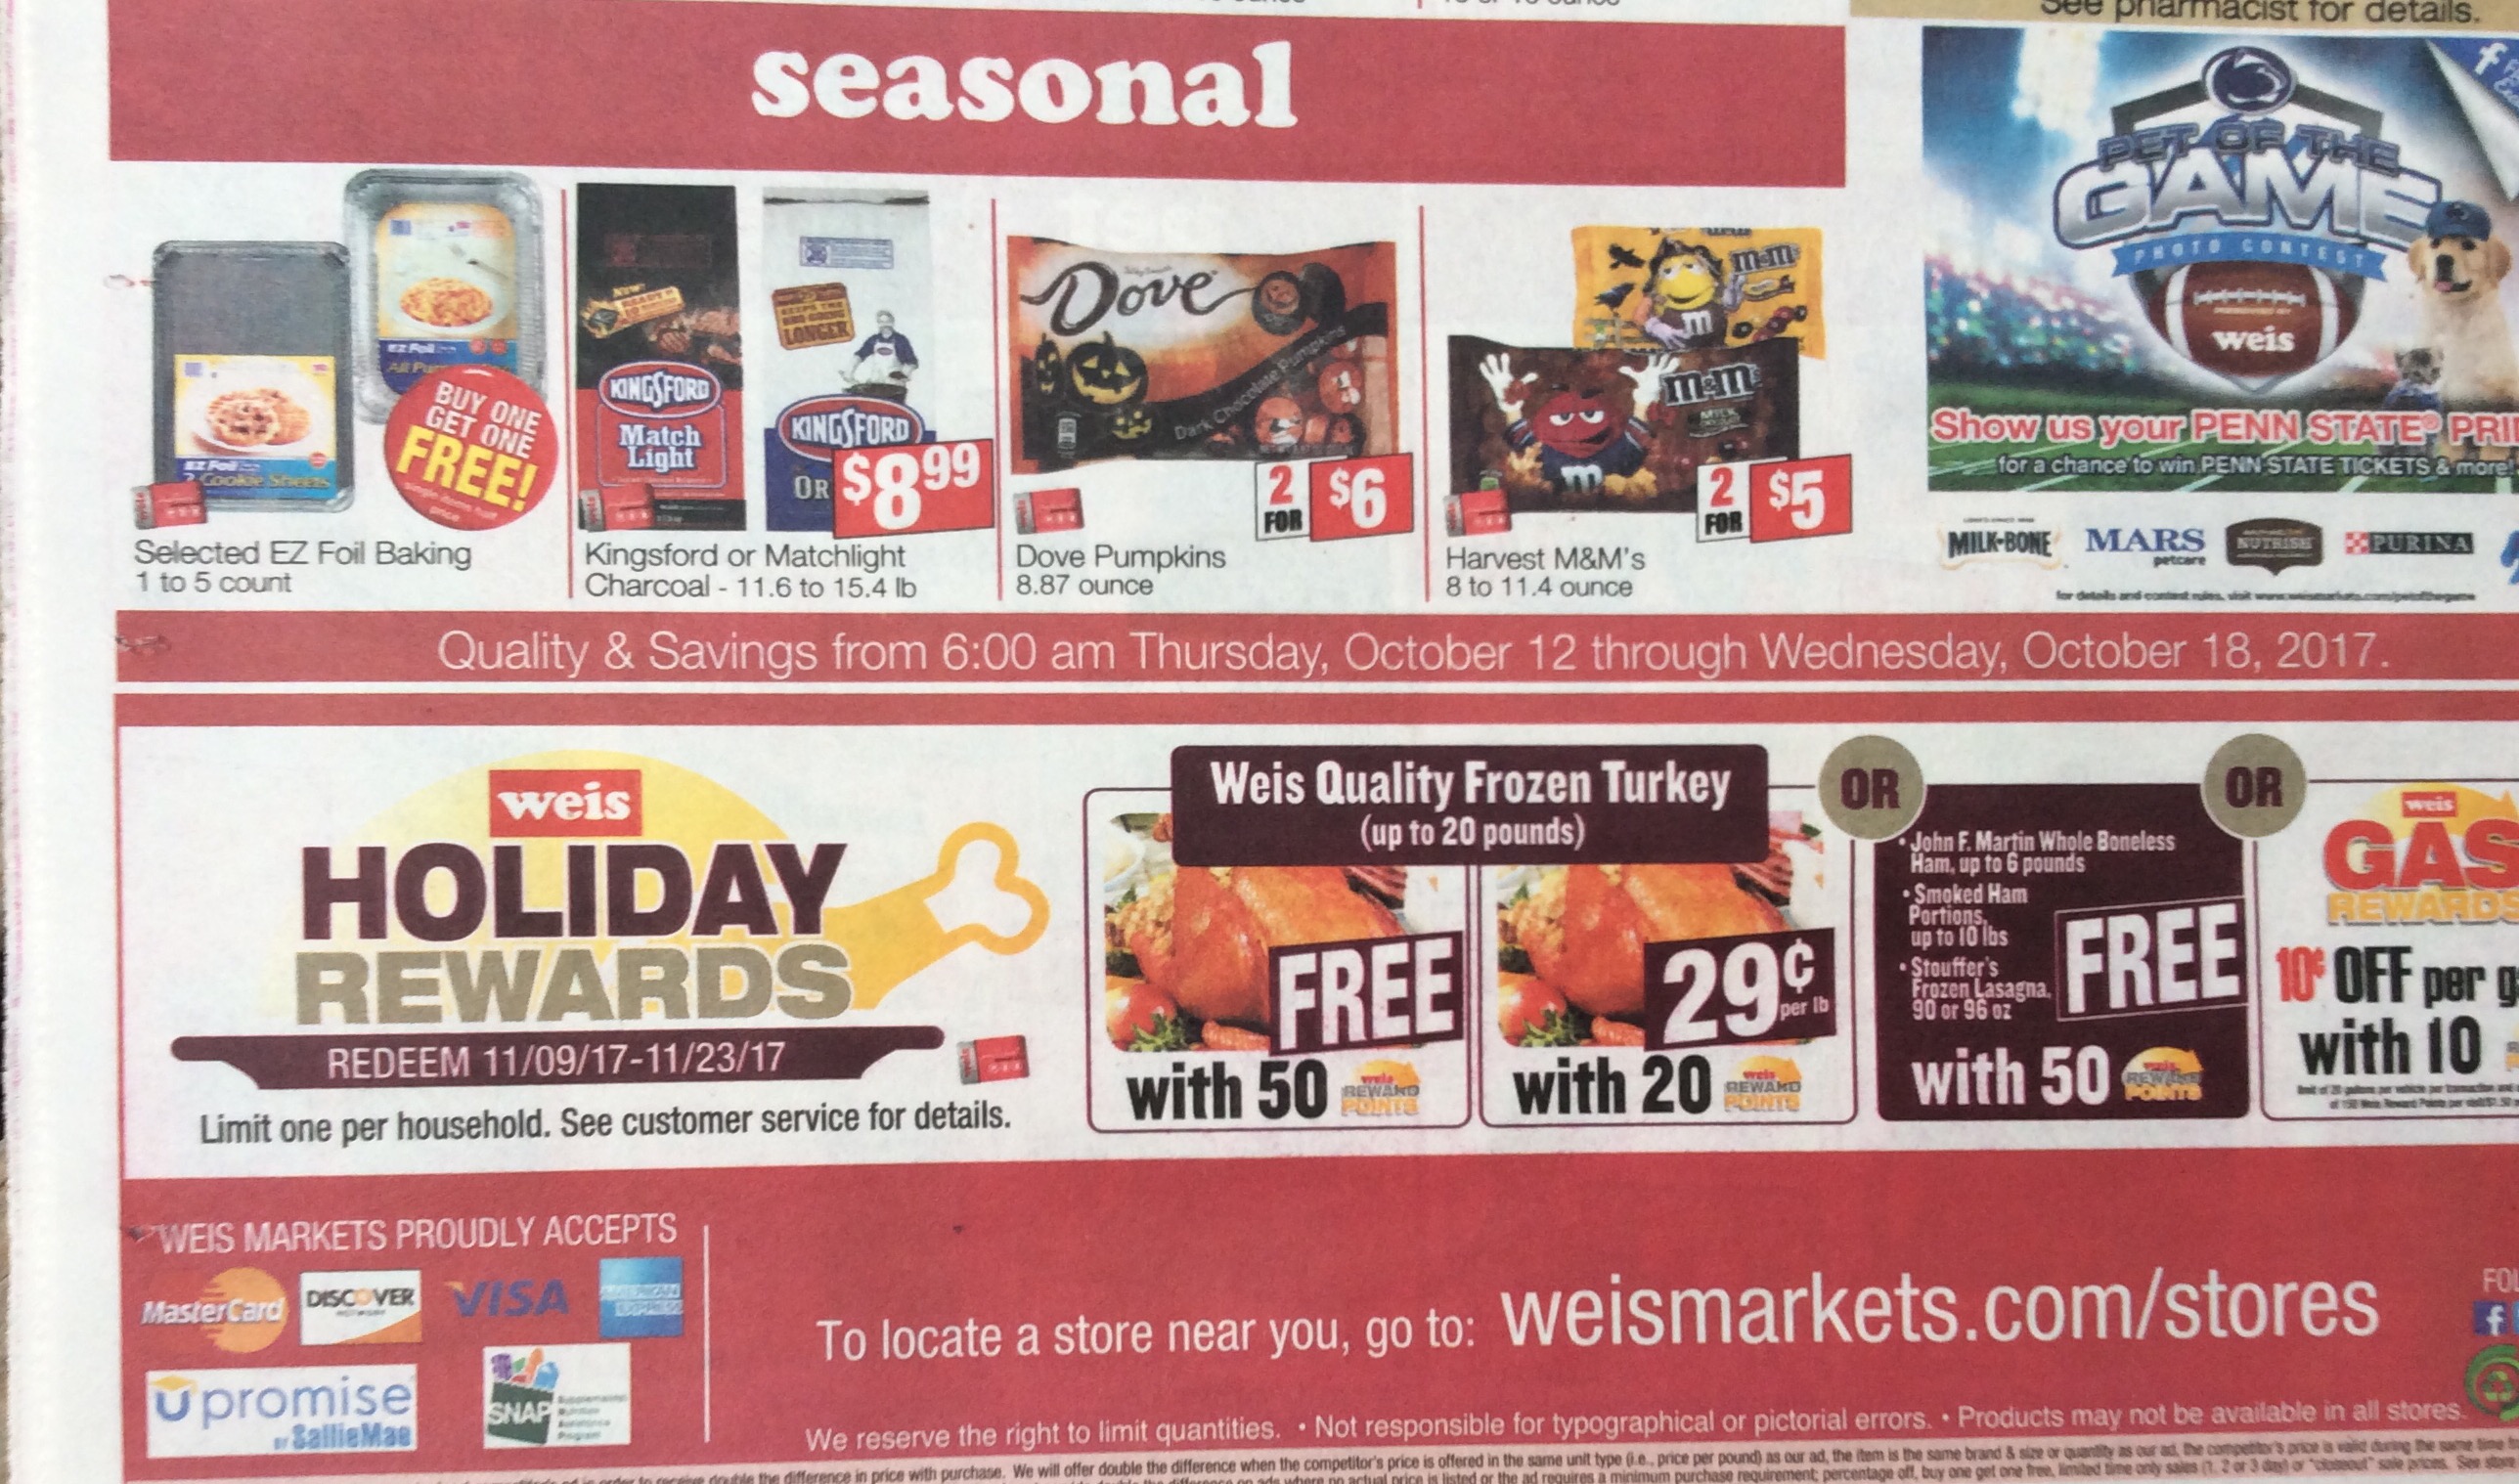 Weis Earn Points for a FREE Turkey, Ham, or Lasagna SHIP SAVES